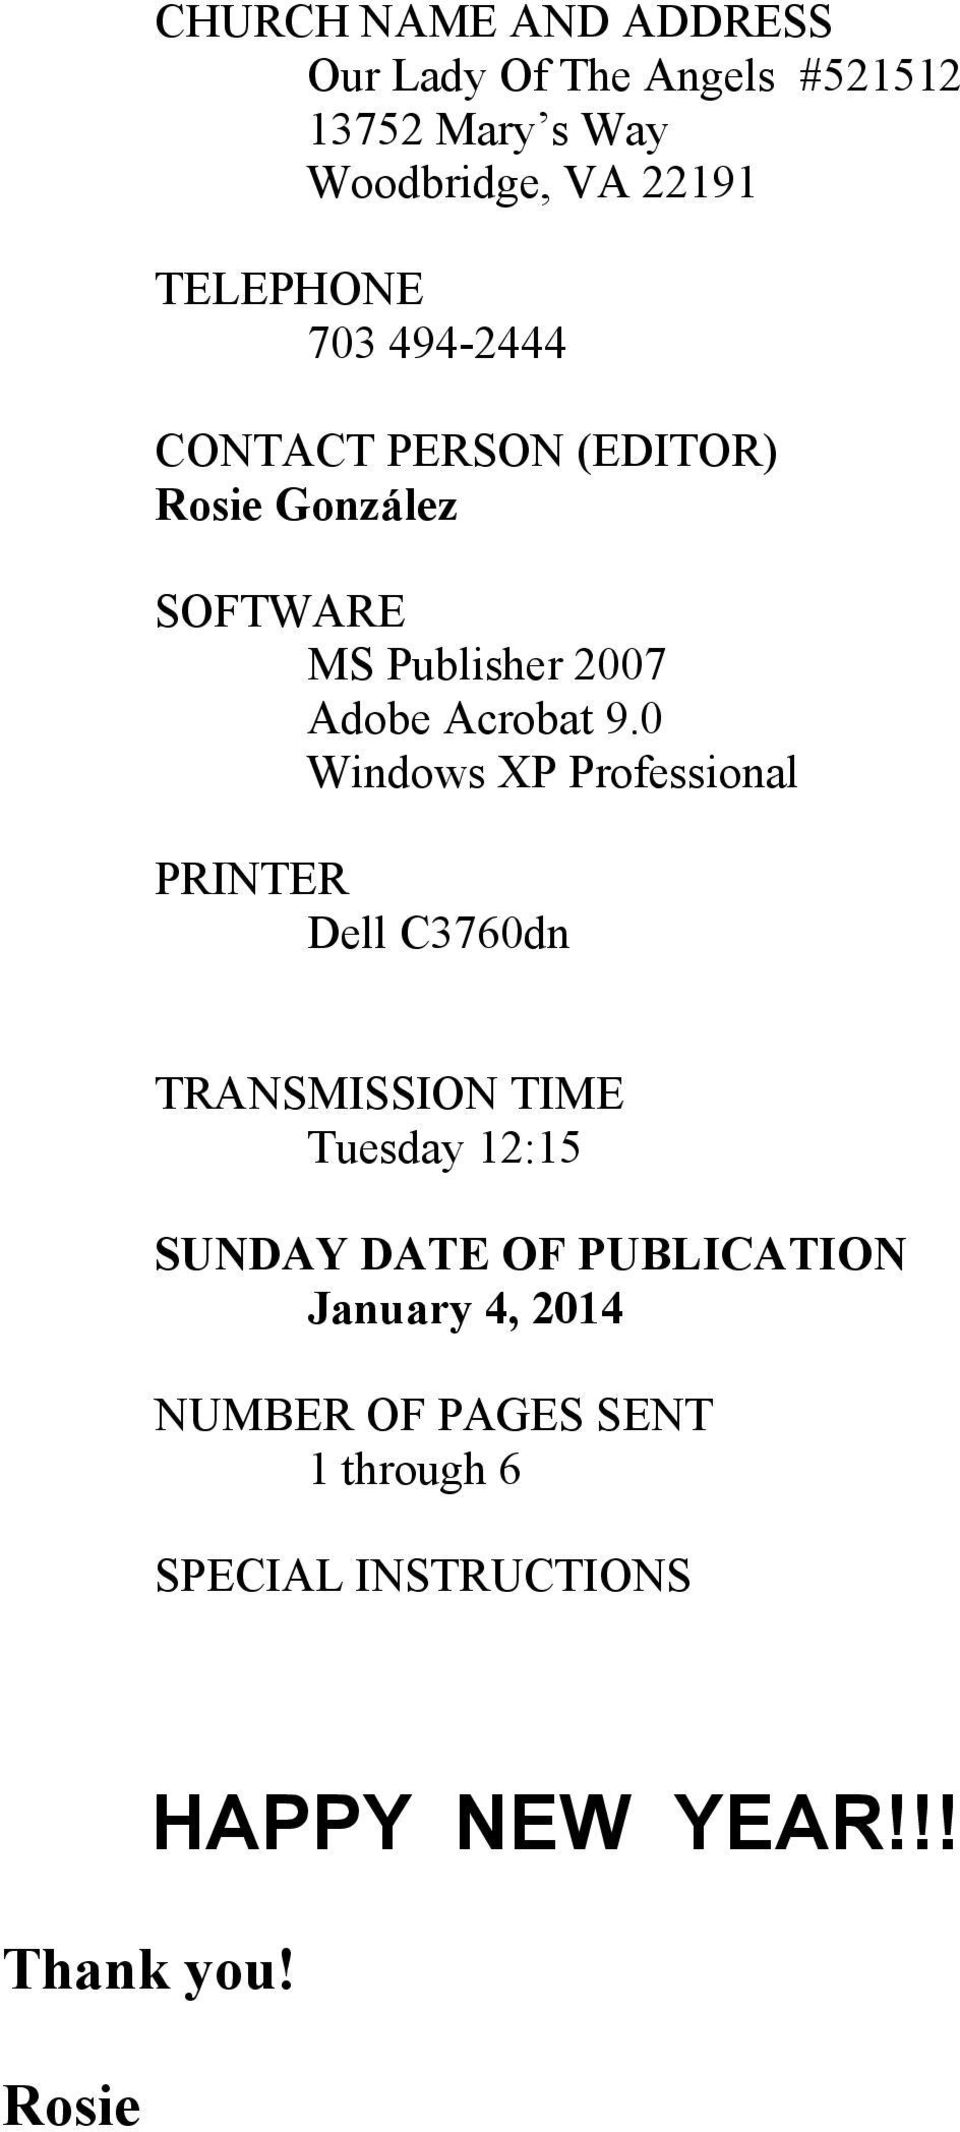 0 Windows XP Professional PRINTER Dell C3760dn TRANSMISSION TIME Tuesday 12:15 SUNDAY DATE OF